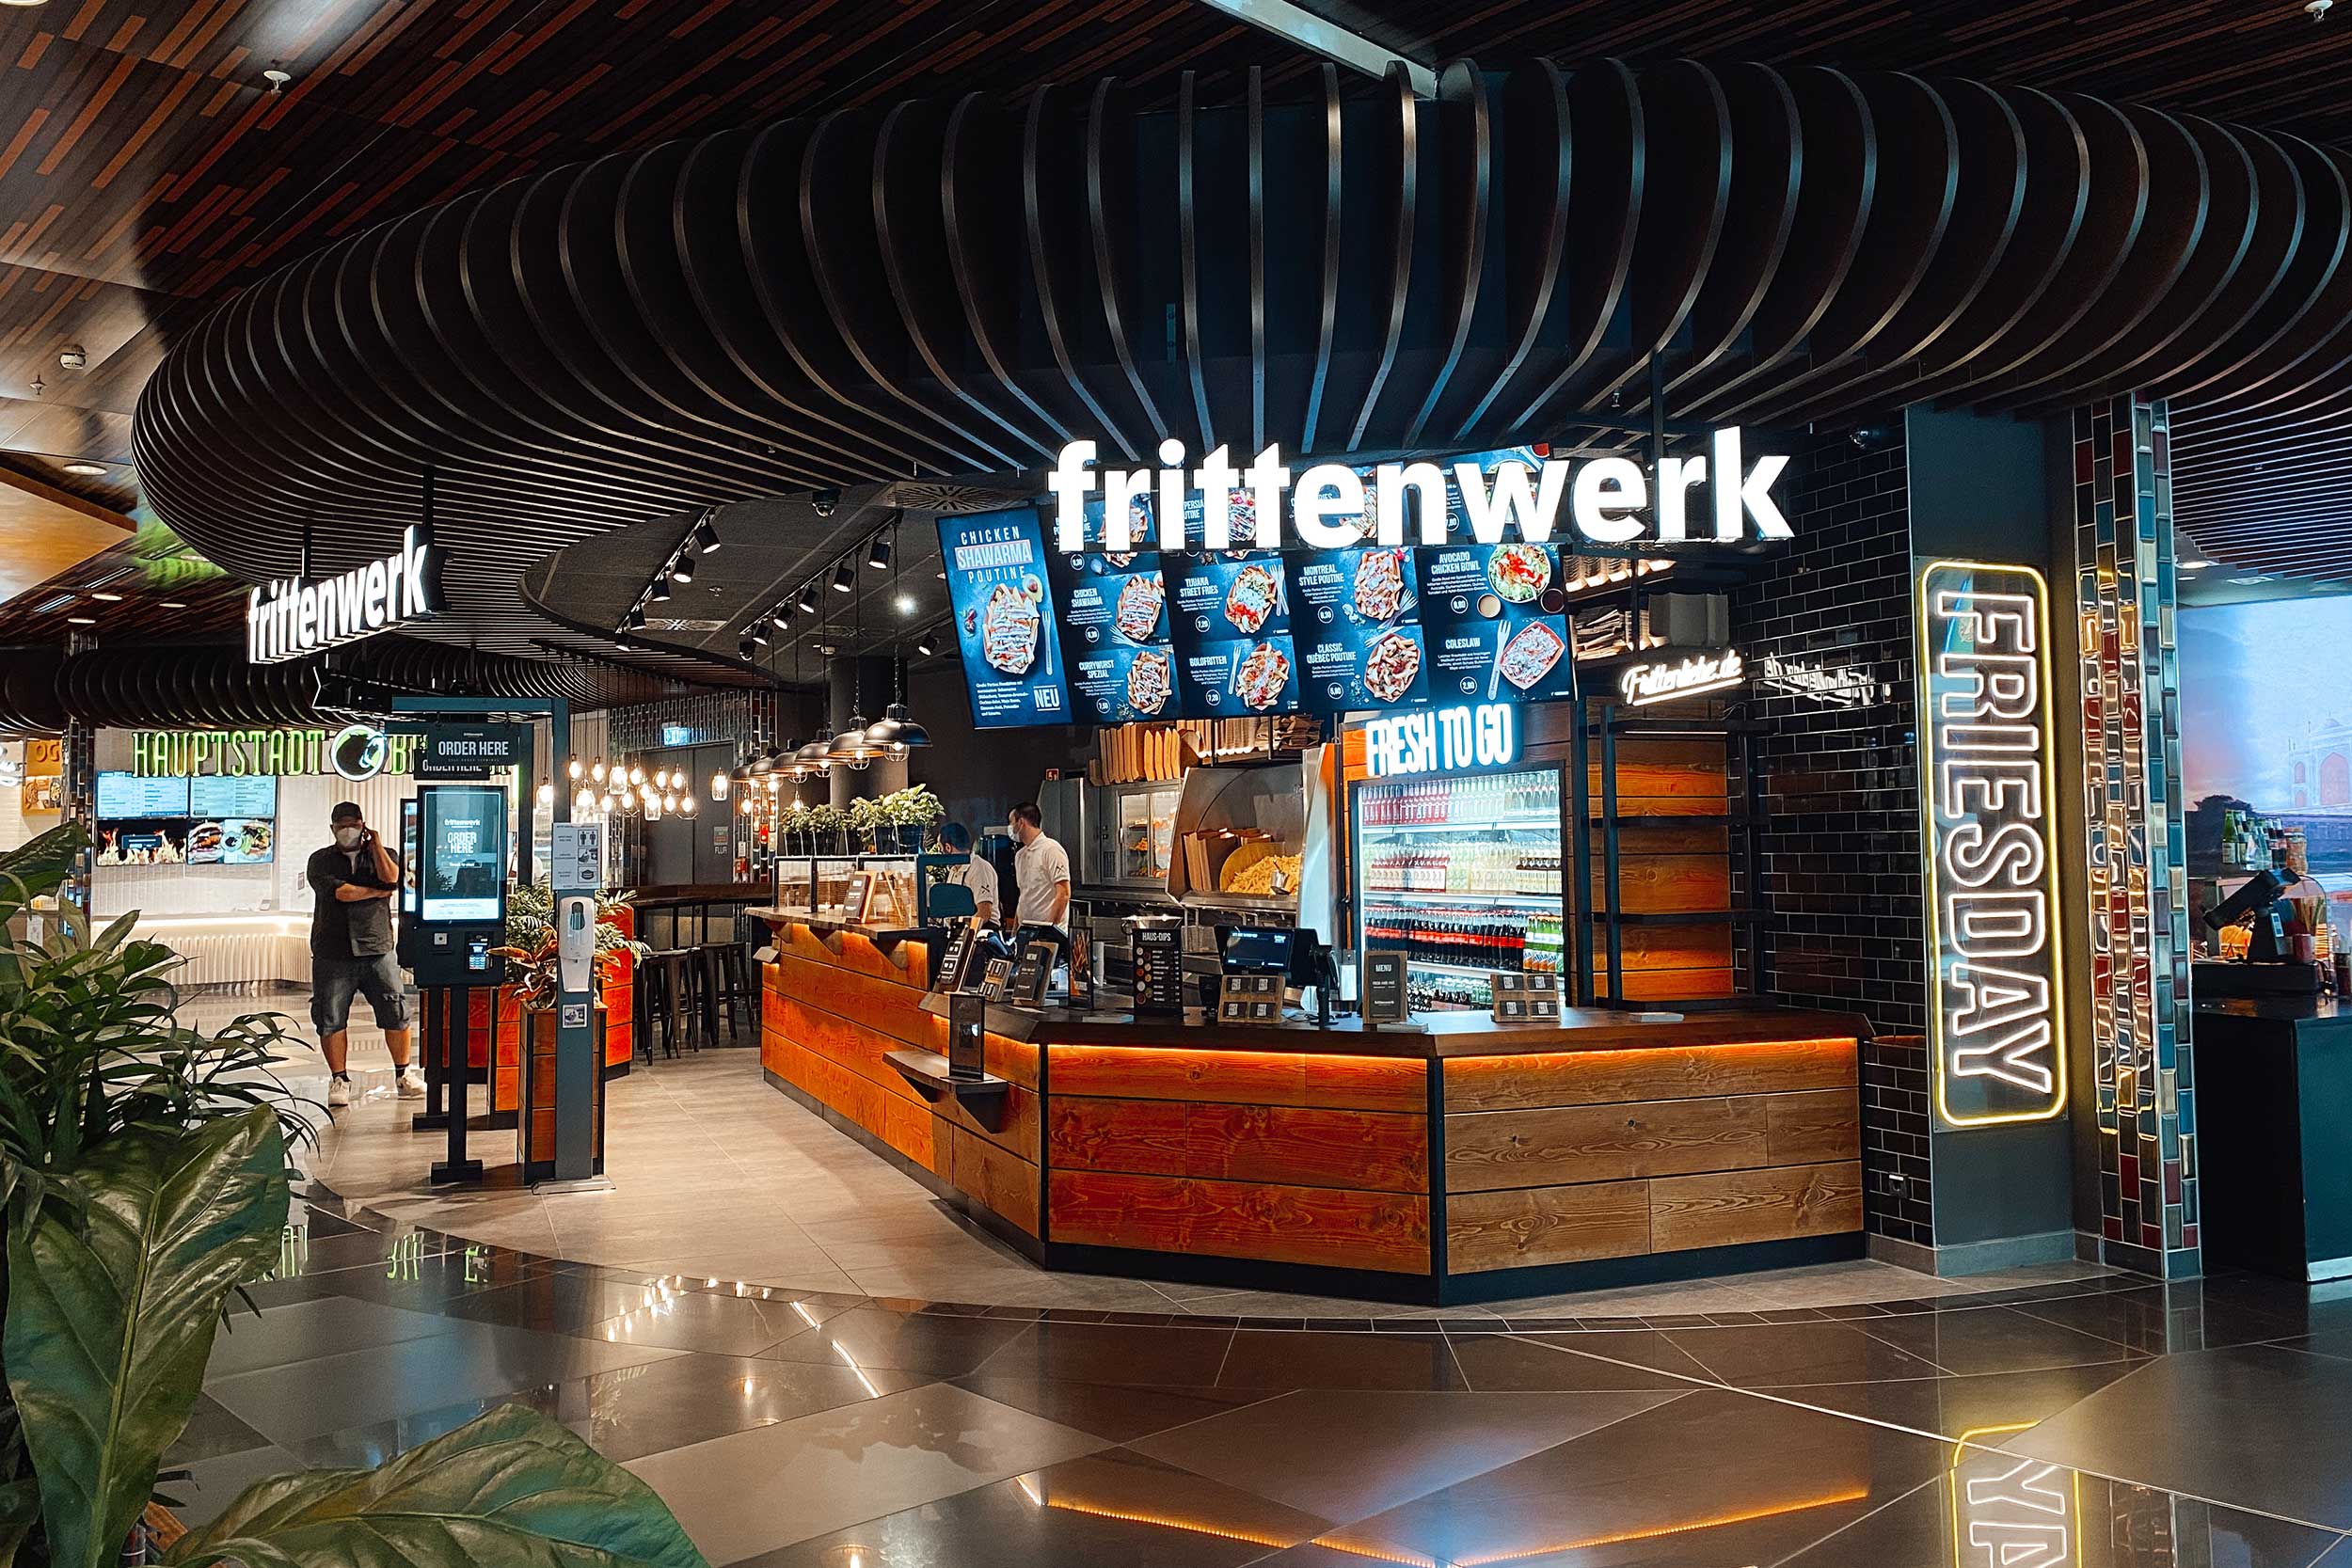 Frittenwerk at the Mall of Berlin